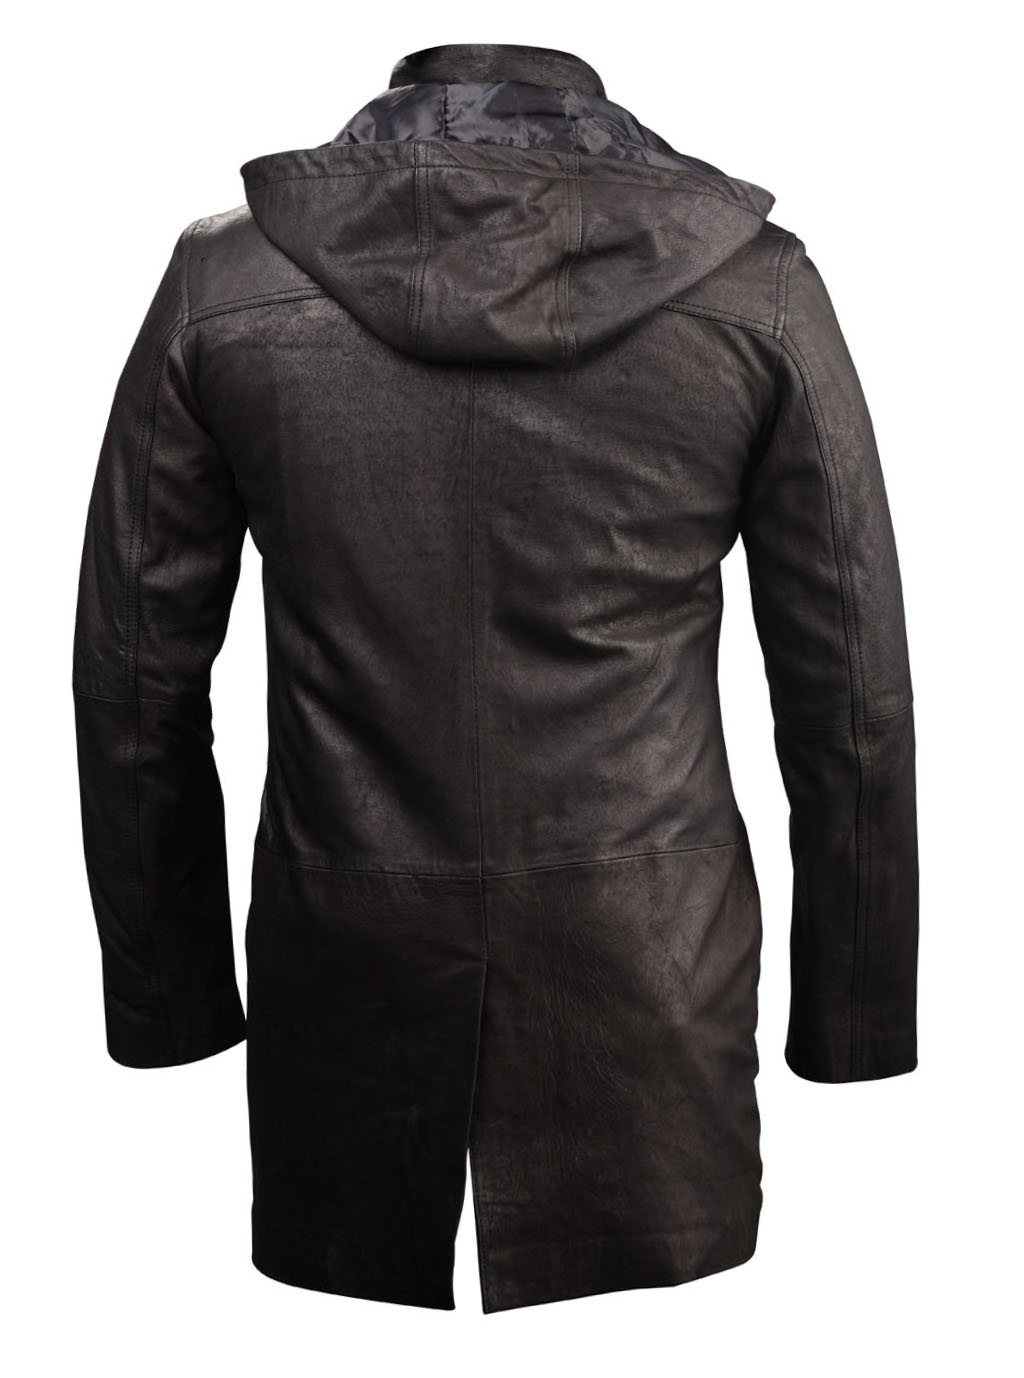 Snuff Leather Jackets Blazar Trench Coat Hooded Men | Buy Now